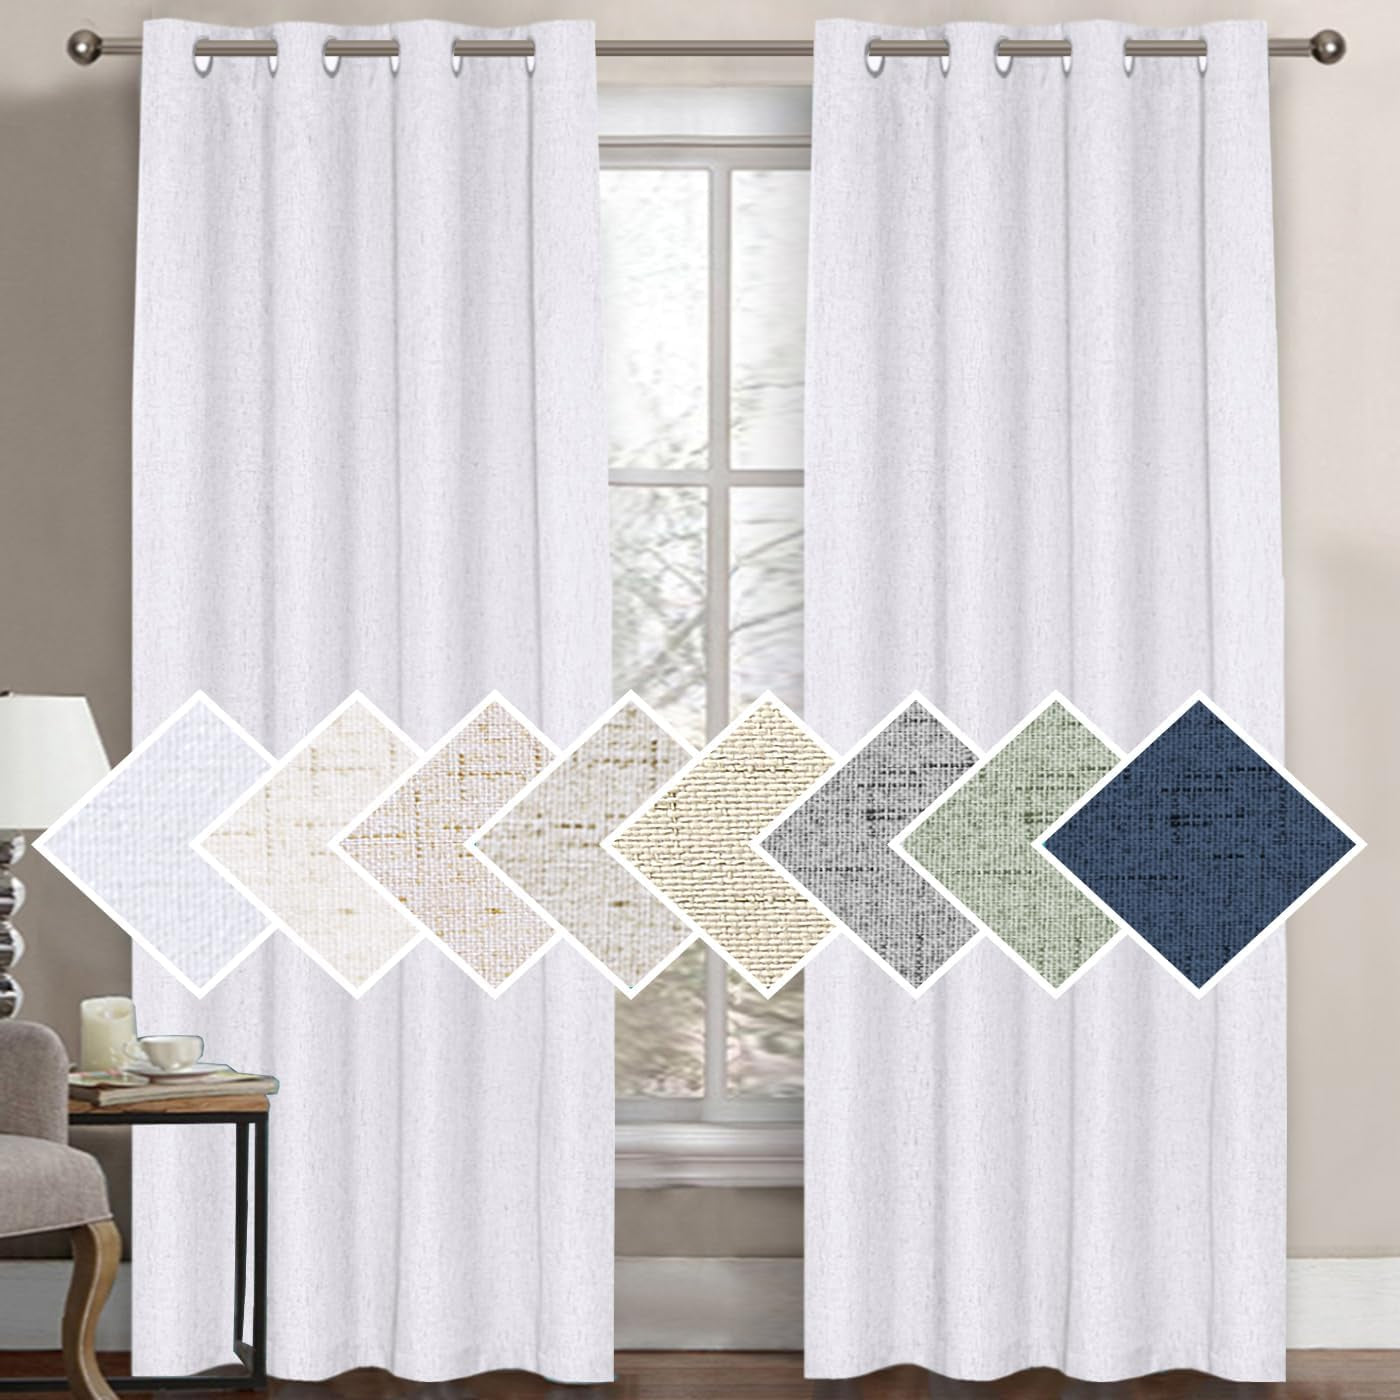 H.VERSAILTEX 100% Blackout Curtains for Bedroom Thermal Insulated Linen Textured Curtains Heat and Full Light Blocking Drapes Living Room Curtains 2 Panel Sets, 52X84 - Inch, Natural  H.VERSAILTEX Pure White 1 Panel - 52"W X 96"L 